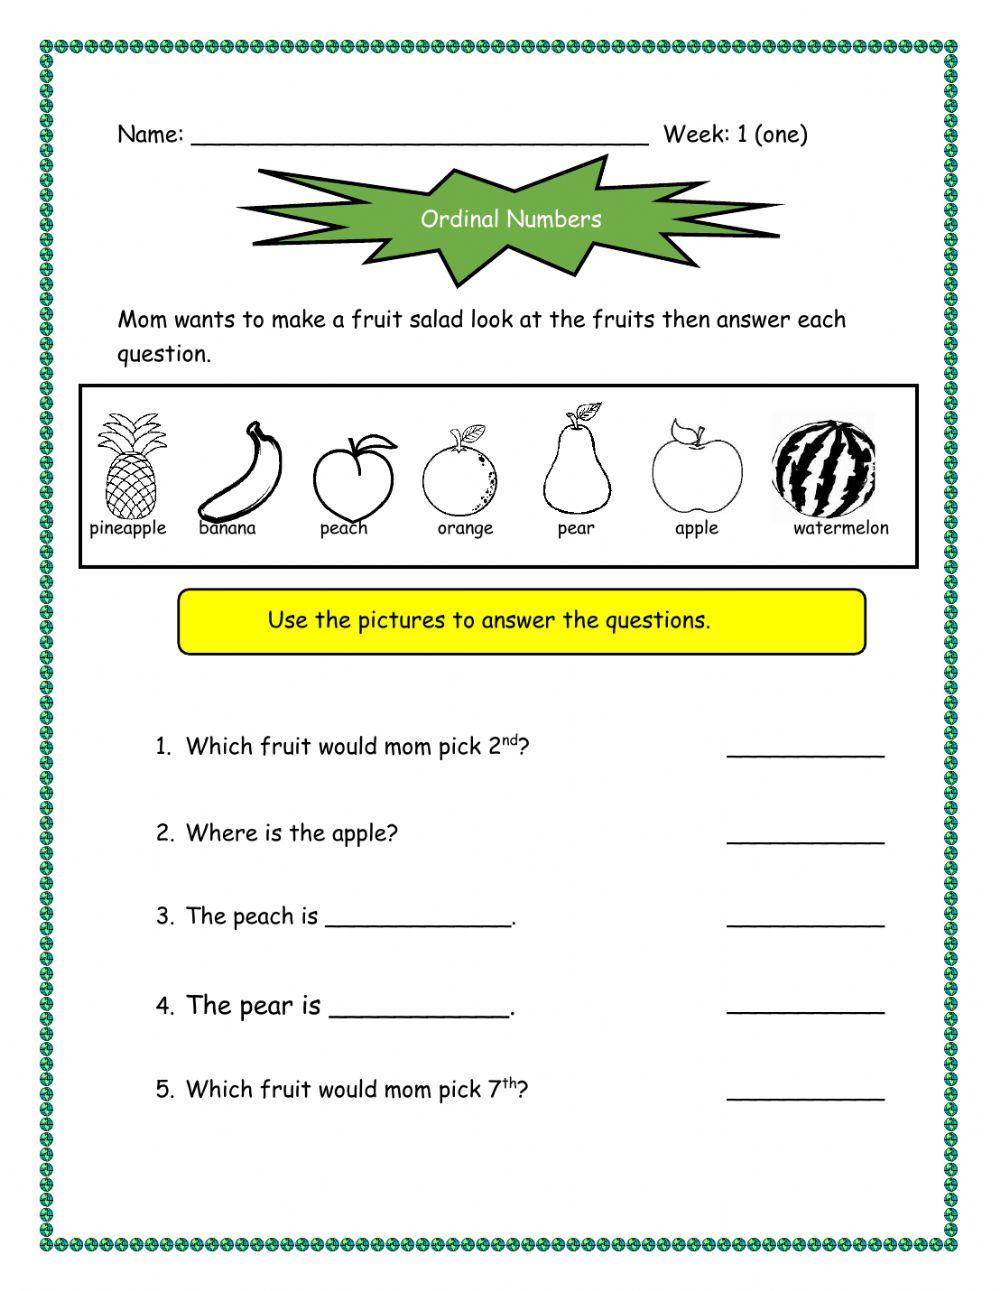 Ordinal Numbers Application